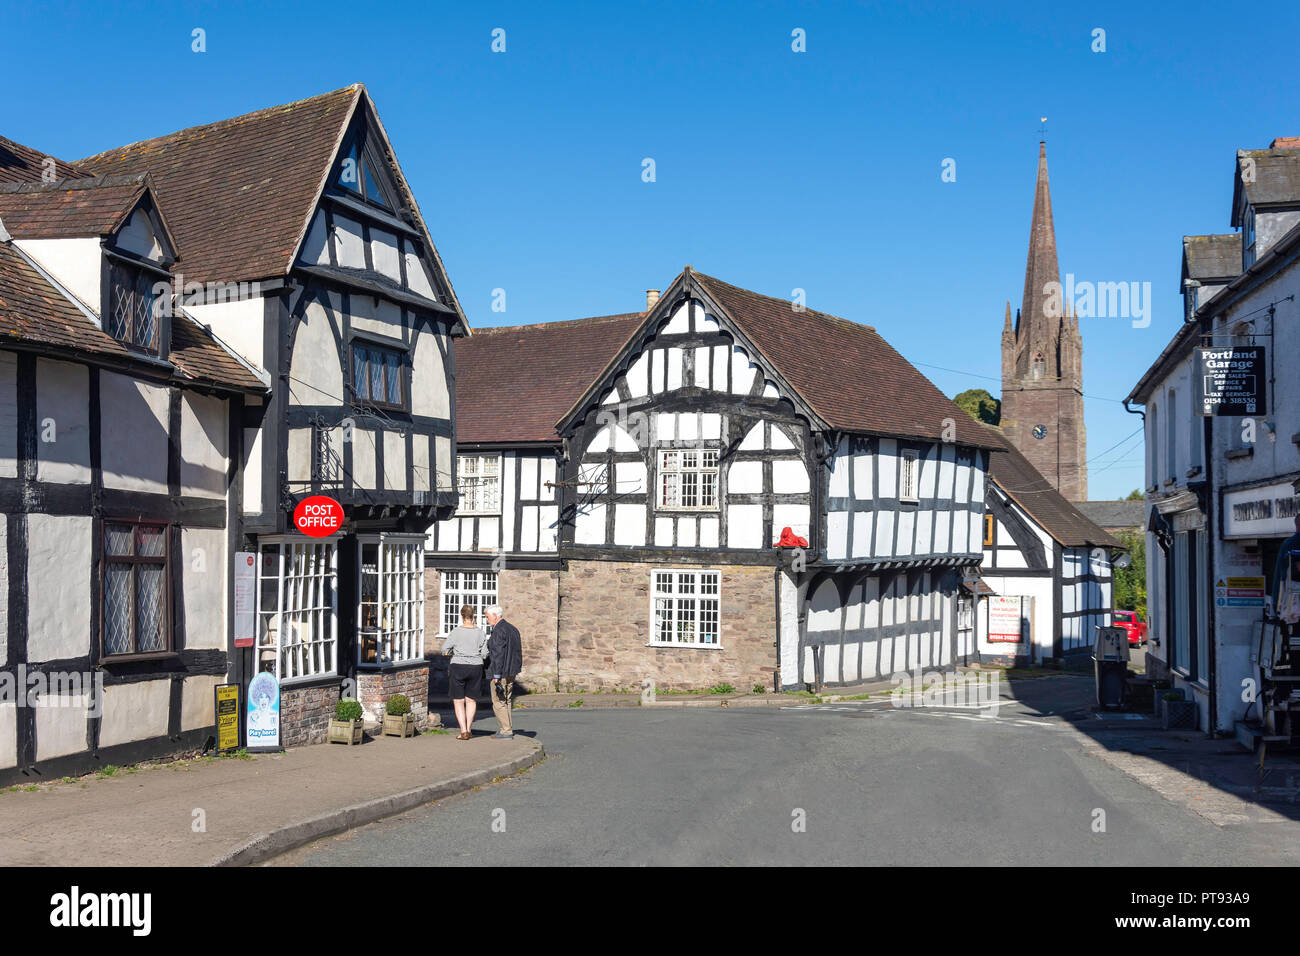 Ancient 'black and white' buildings, High Street, Weobley, Herefordshire, England, United Kingdom Stock Photo